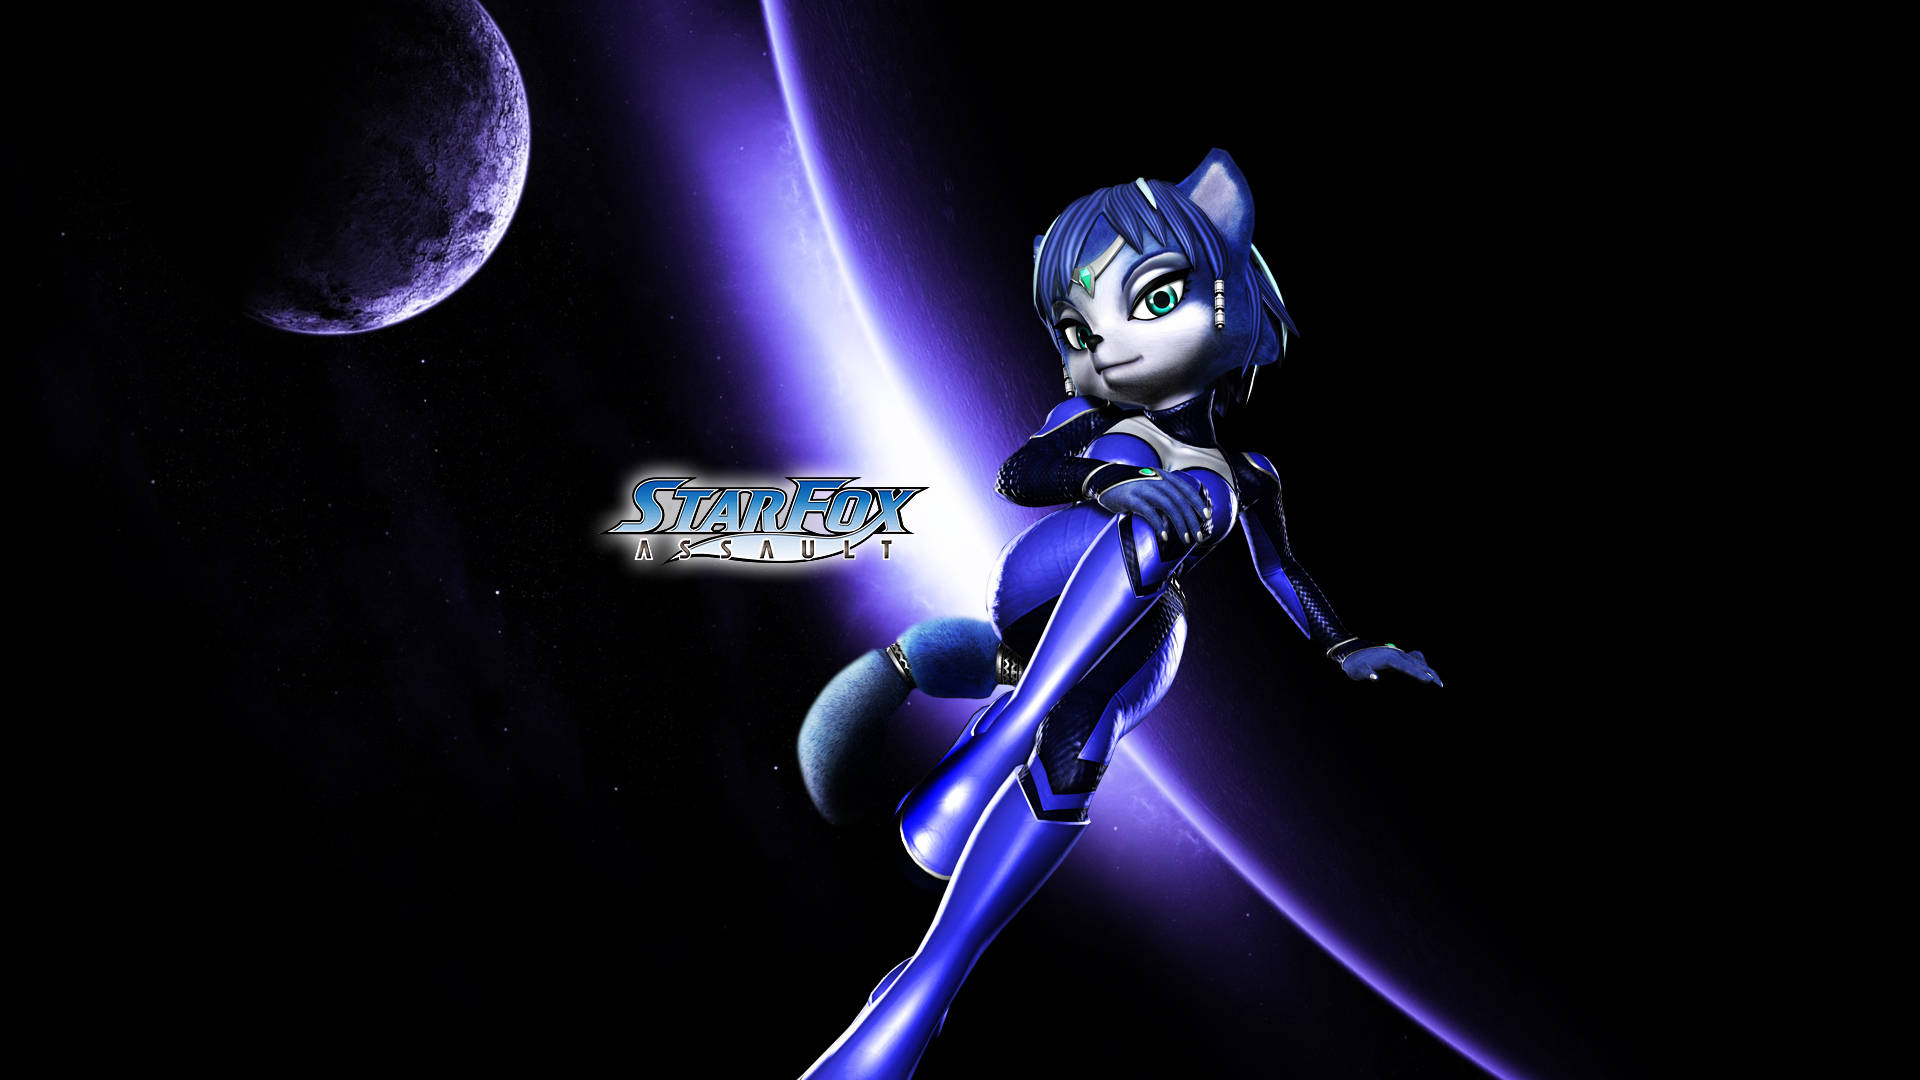 19-facts-about-krystal-star-fox